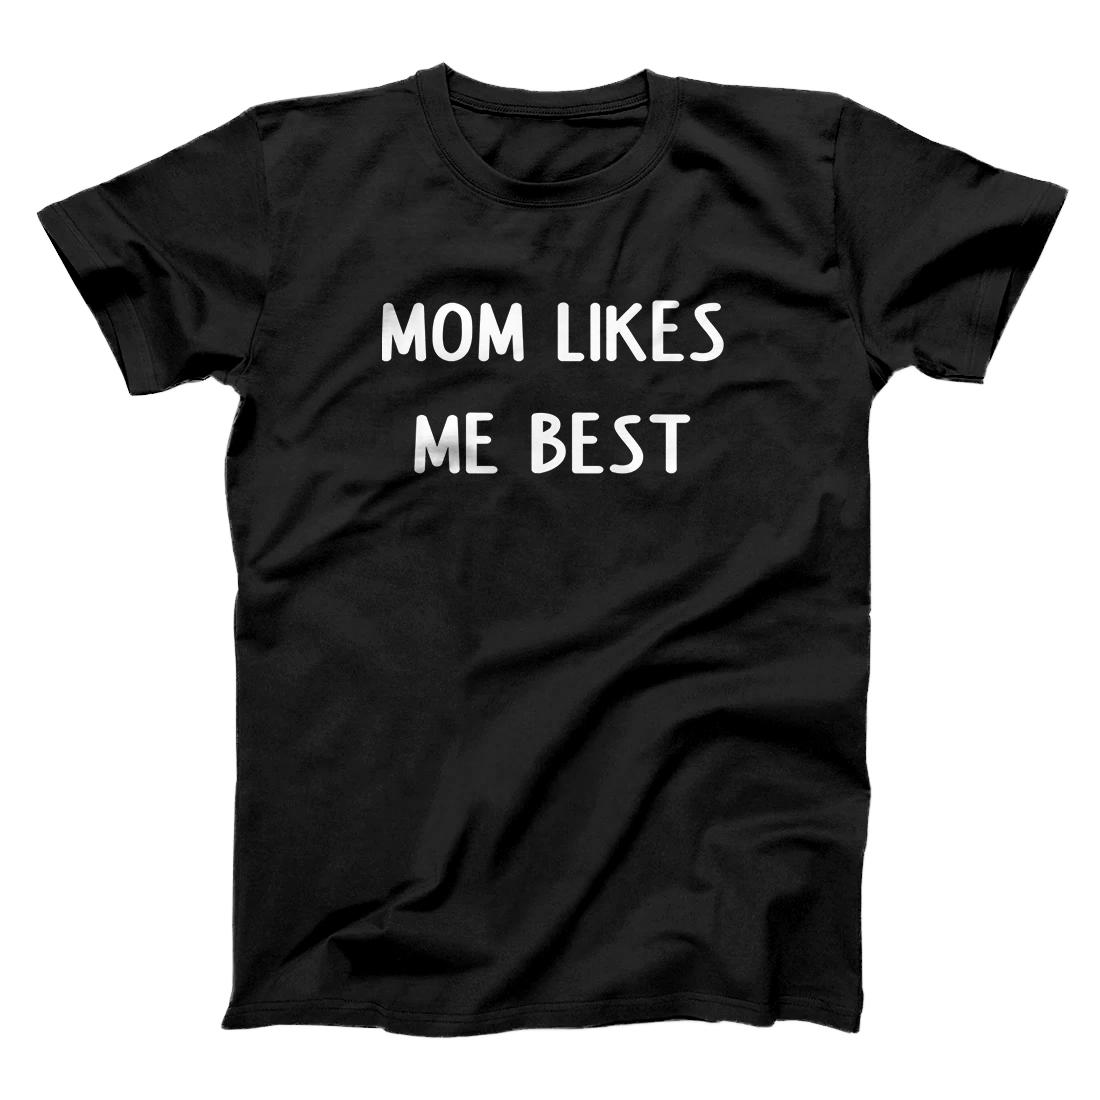 Personalized Mom Likes Me Best, Funny, Joke, Sarcastic, Family T-Shirt